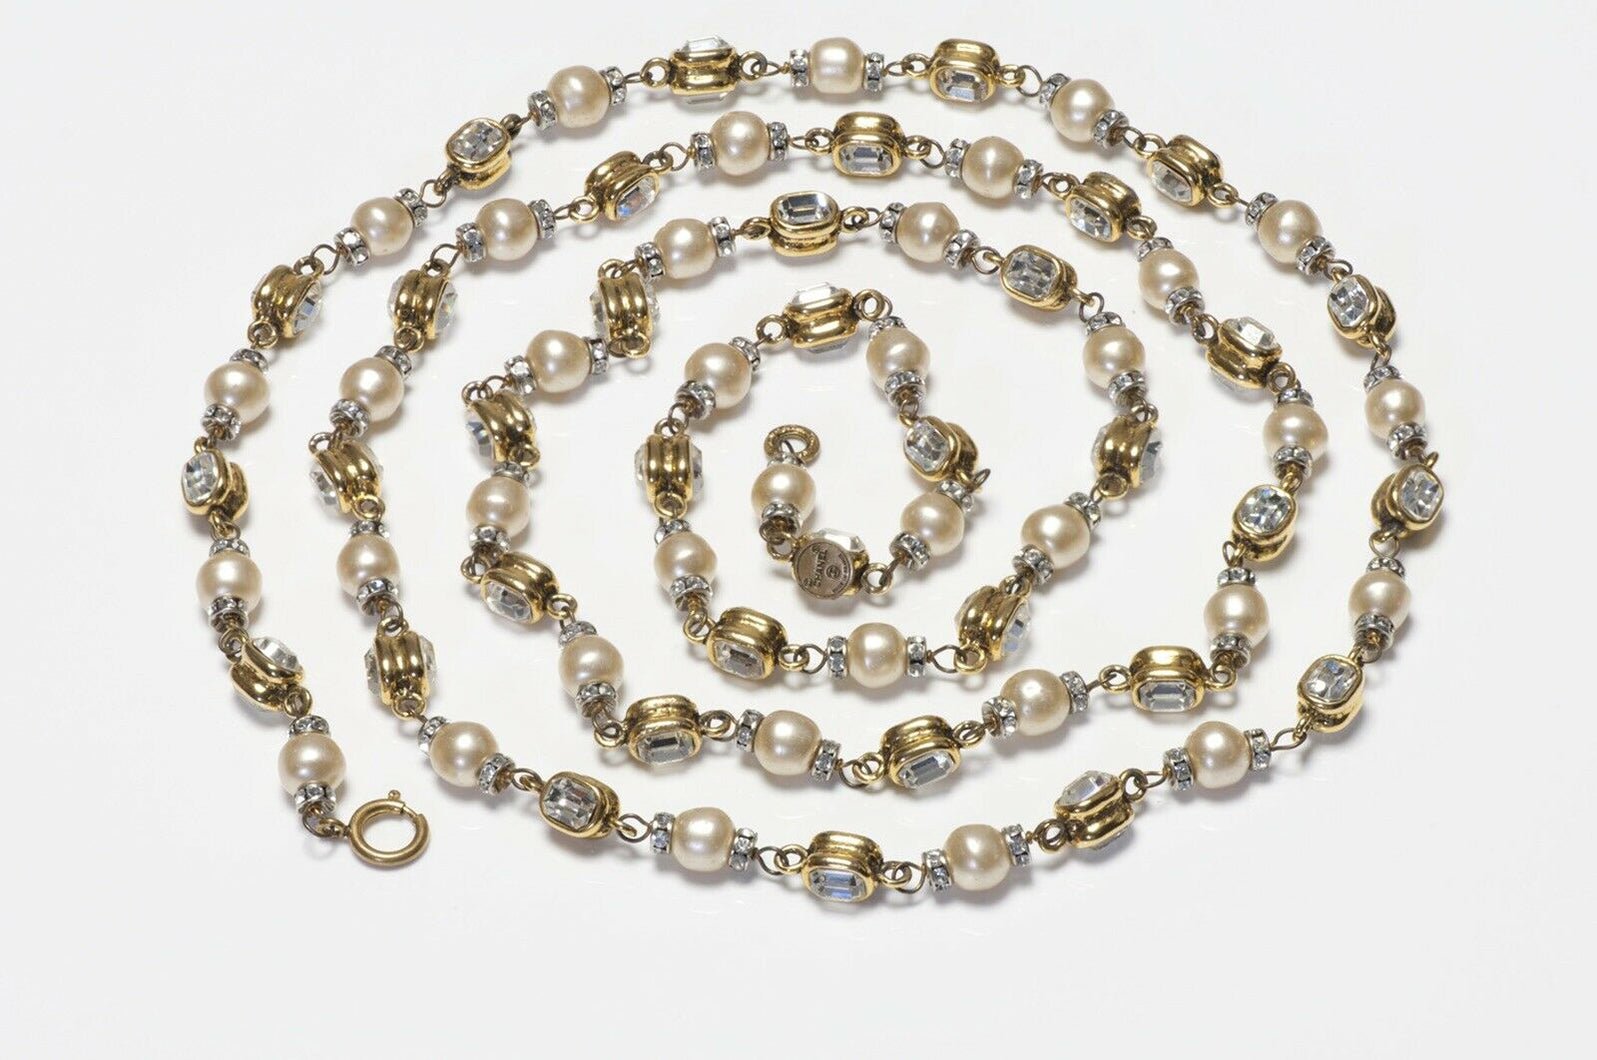 CHANEL 1970’s Byzantine Style Crystal Pearl Chain Sautoir Necklace